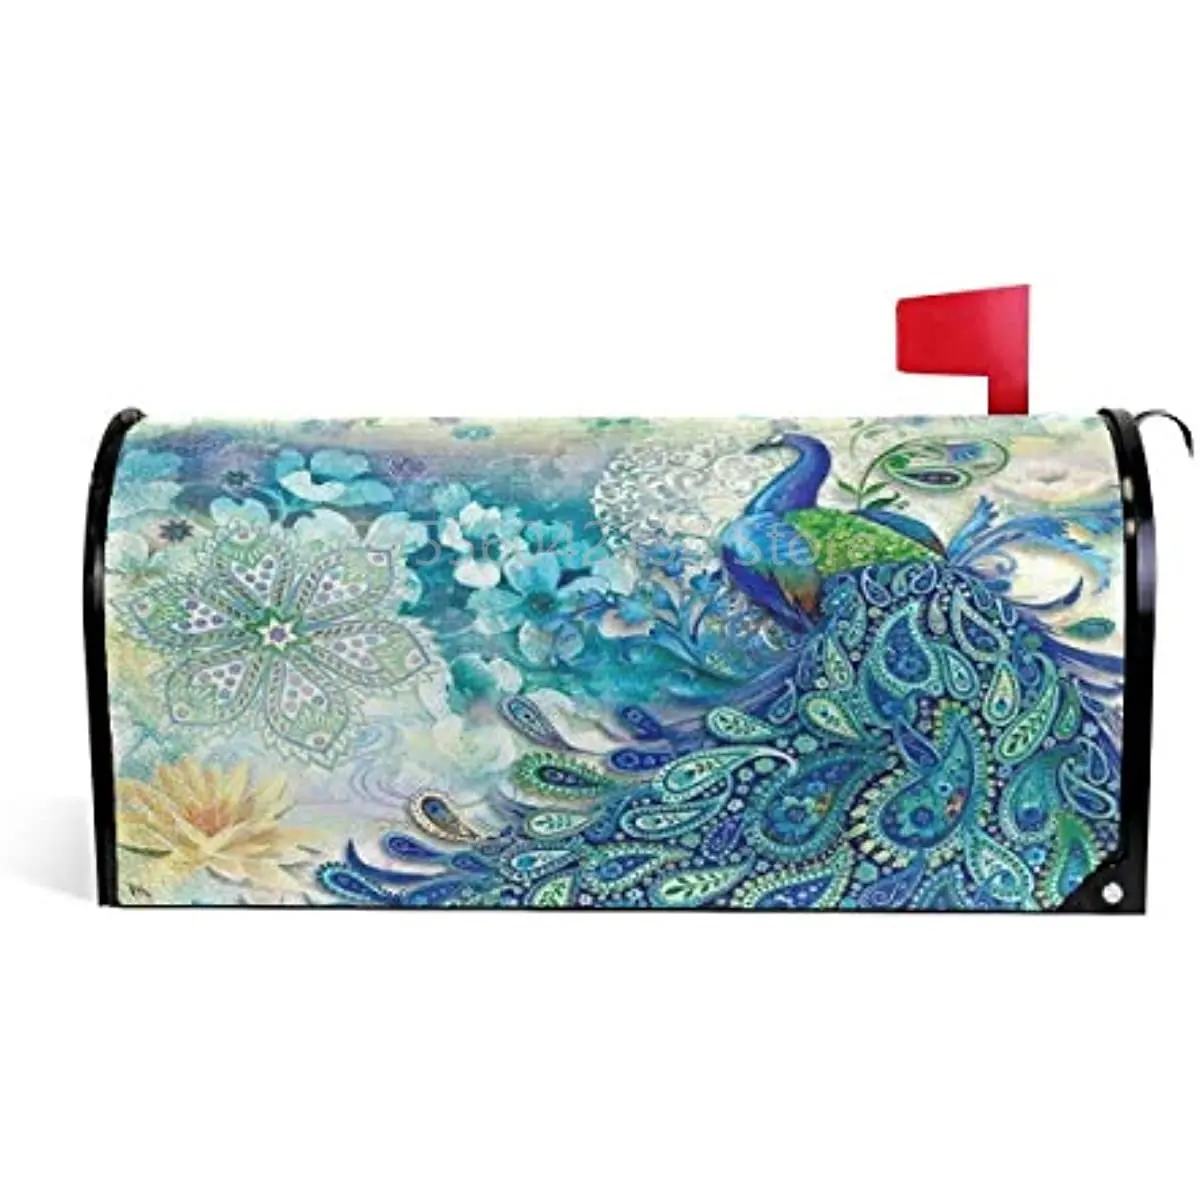 

Peacock Mailbox Covers Magnetic for Home Outdoor Welcome Garden Yard Decor, Flower Letter Post Box Cover Wraps Standard Size